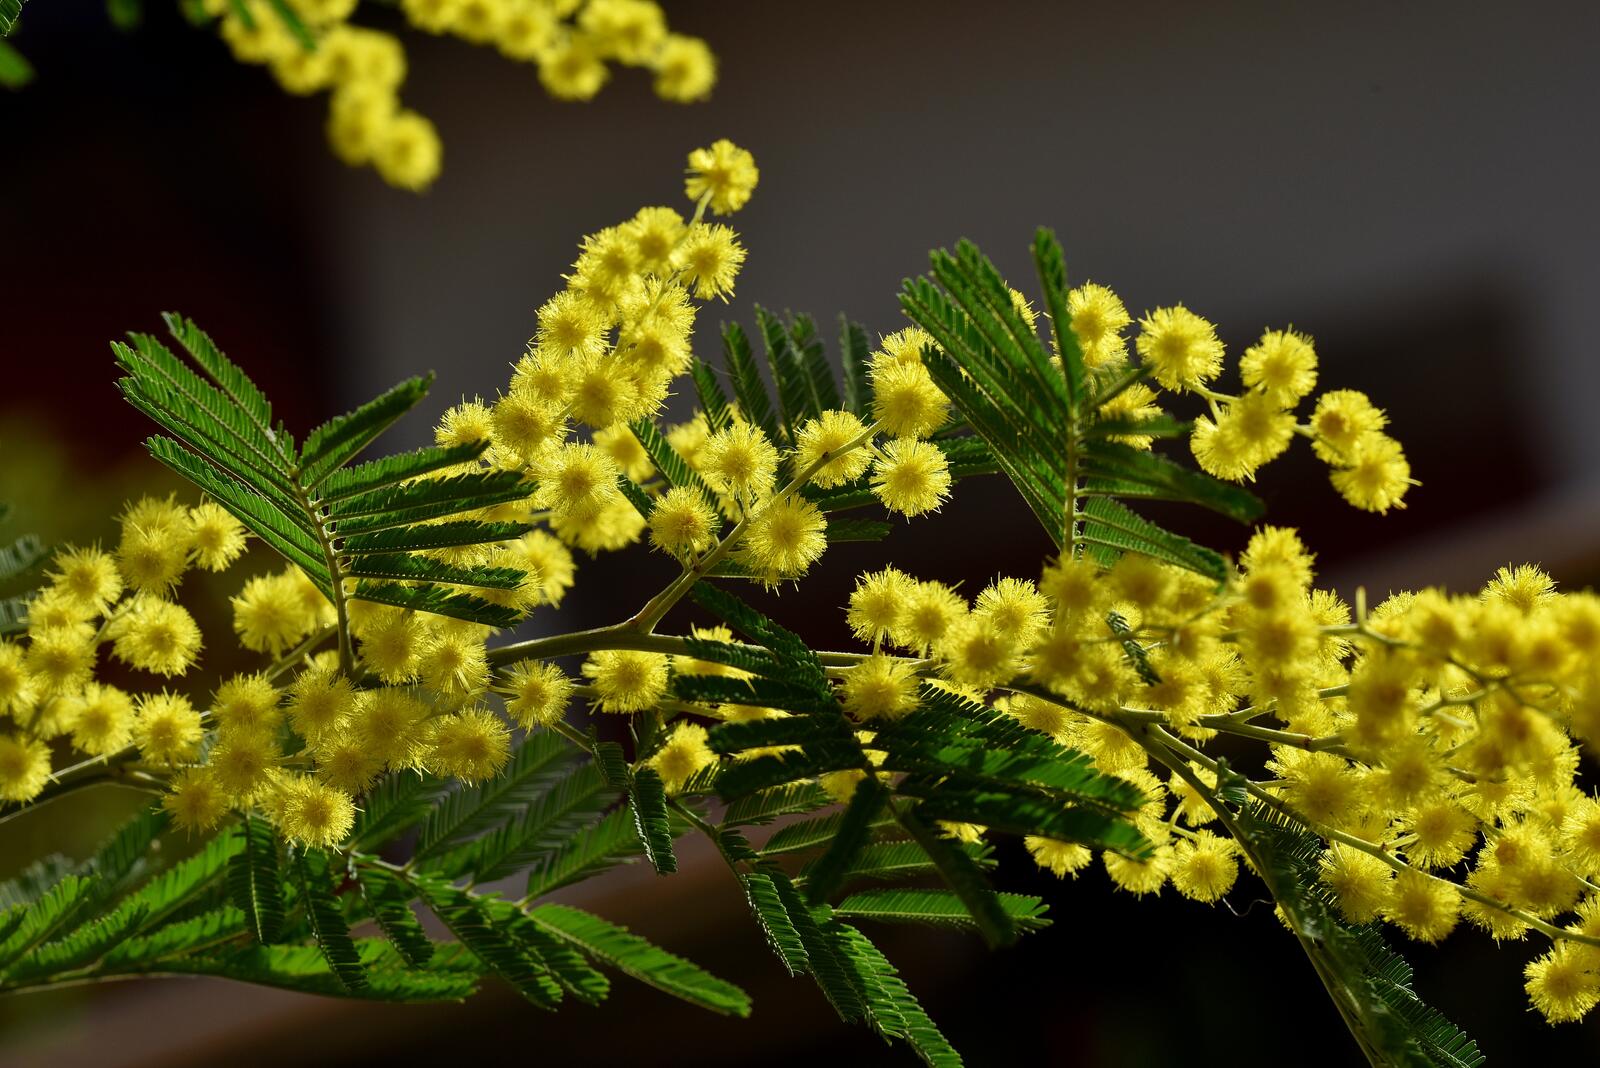 Wallpapers mimosa yellow flowers on the desktop